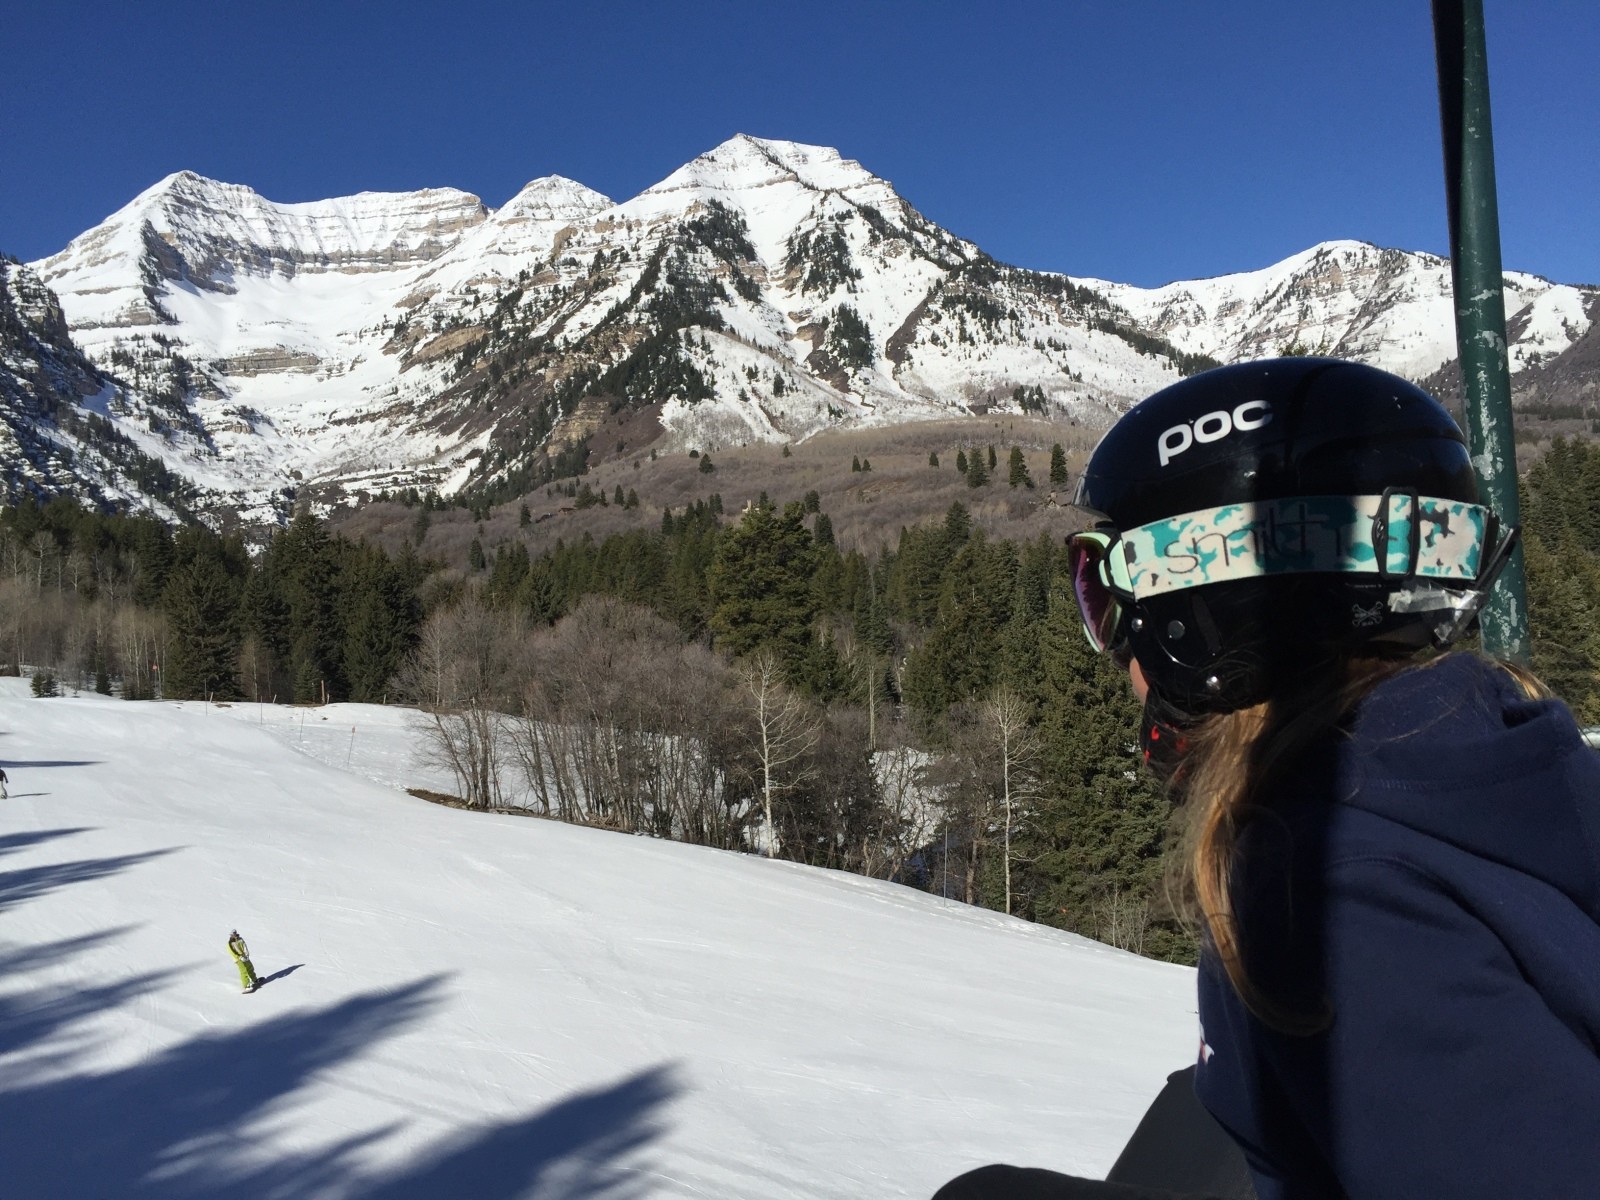 Wide slopes and unmatched beauty at Sundance